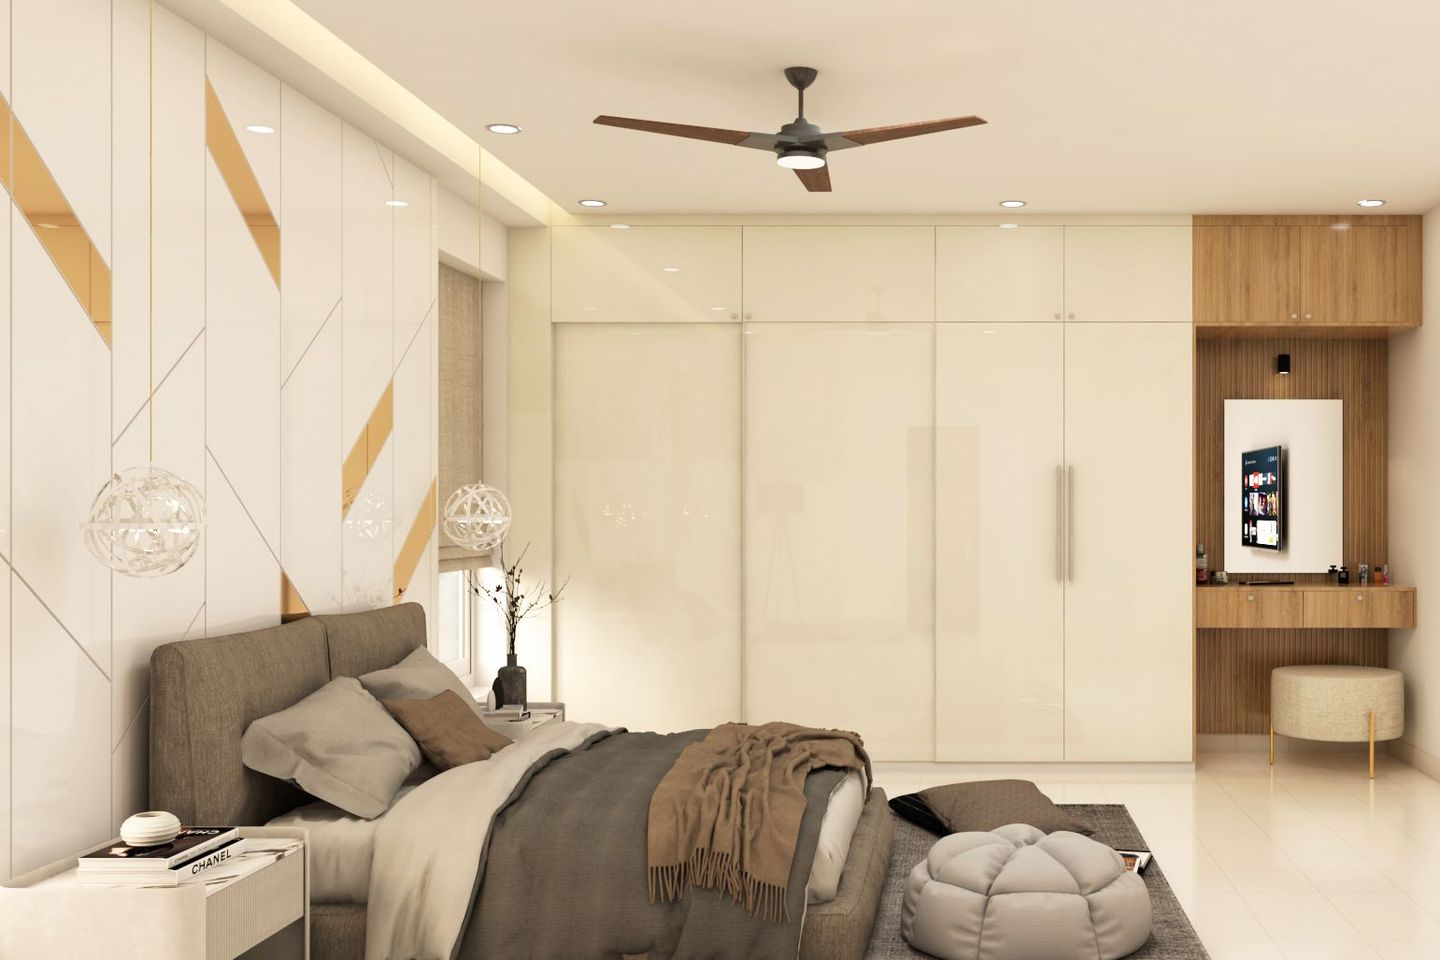 Contemporary Bedroom Design With Glossy Wall Panelling